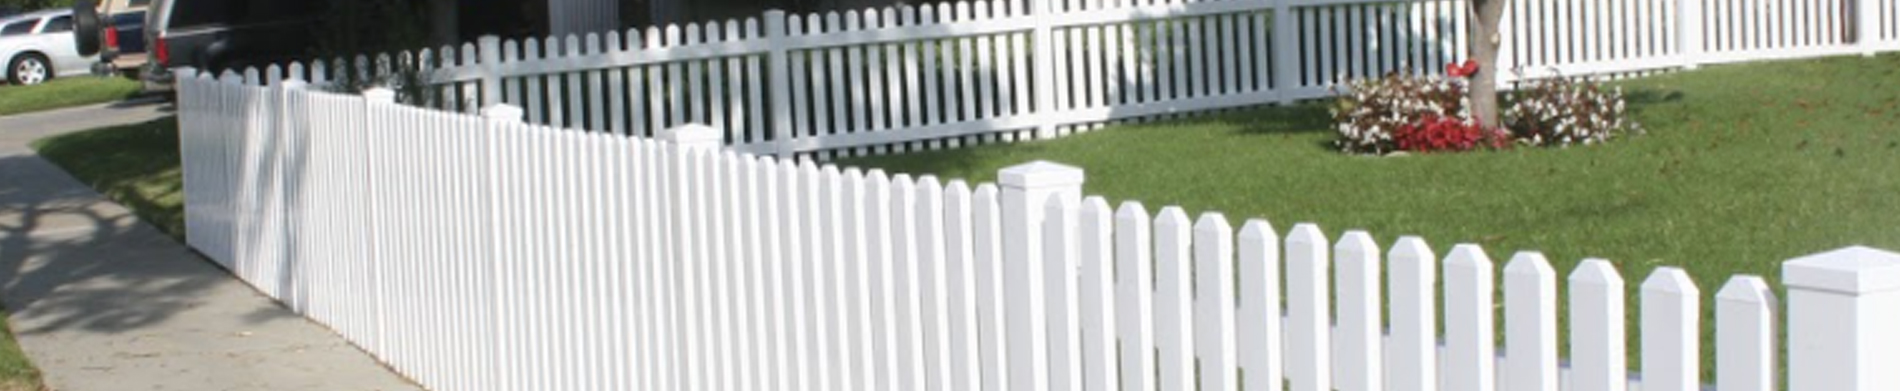 Maintenance-Free Fences – Is There A Thing Like That?